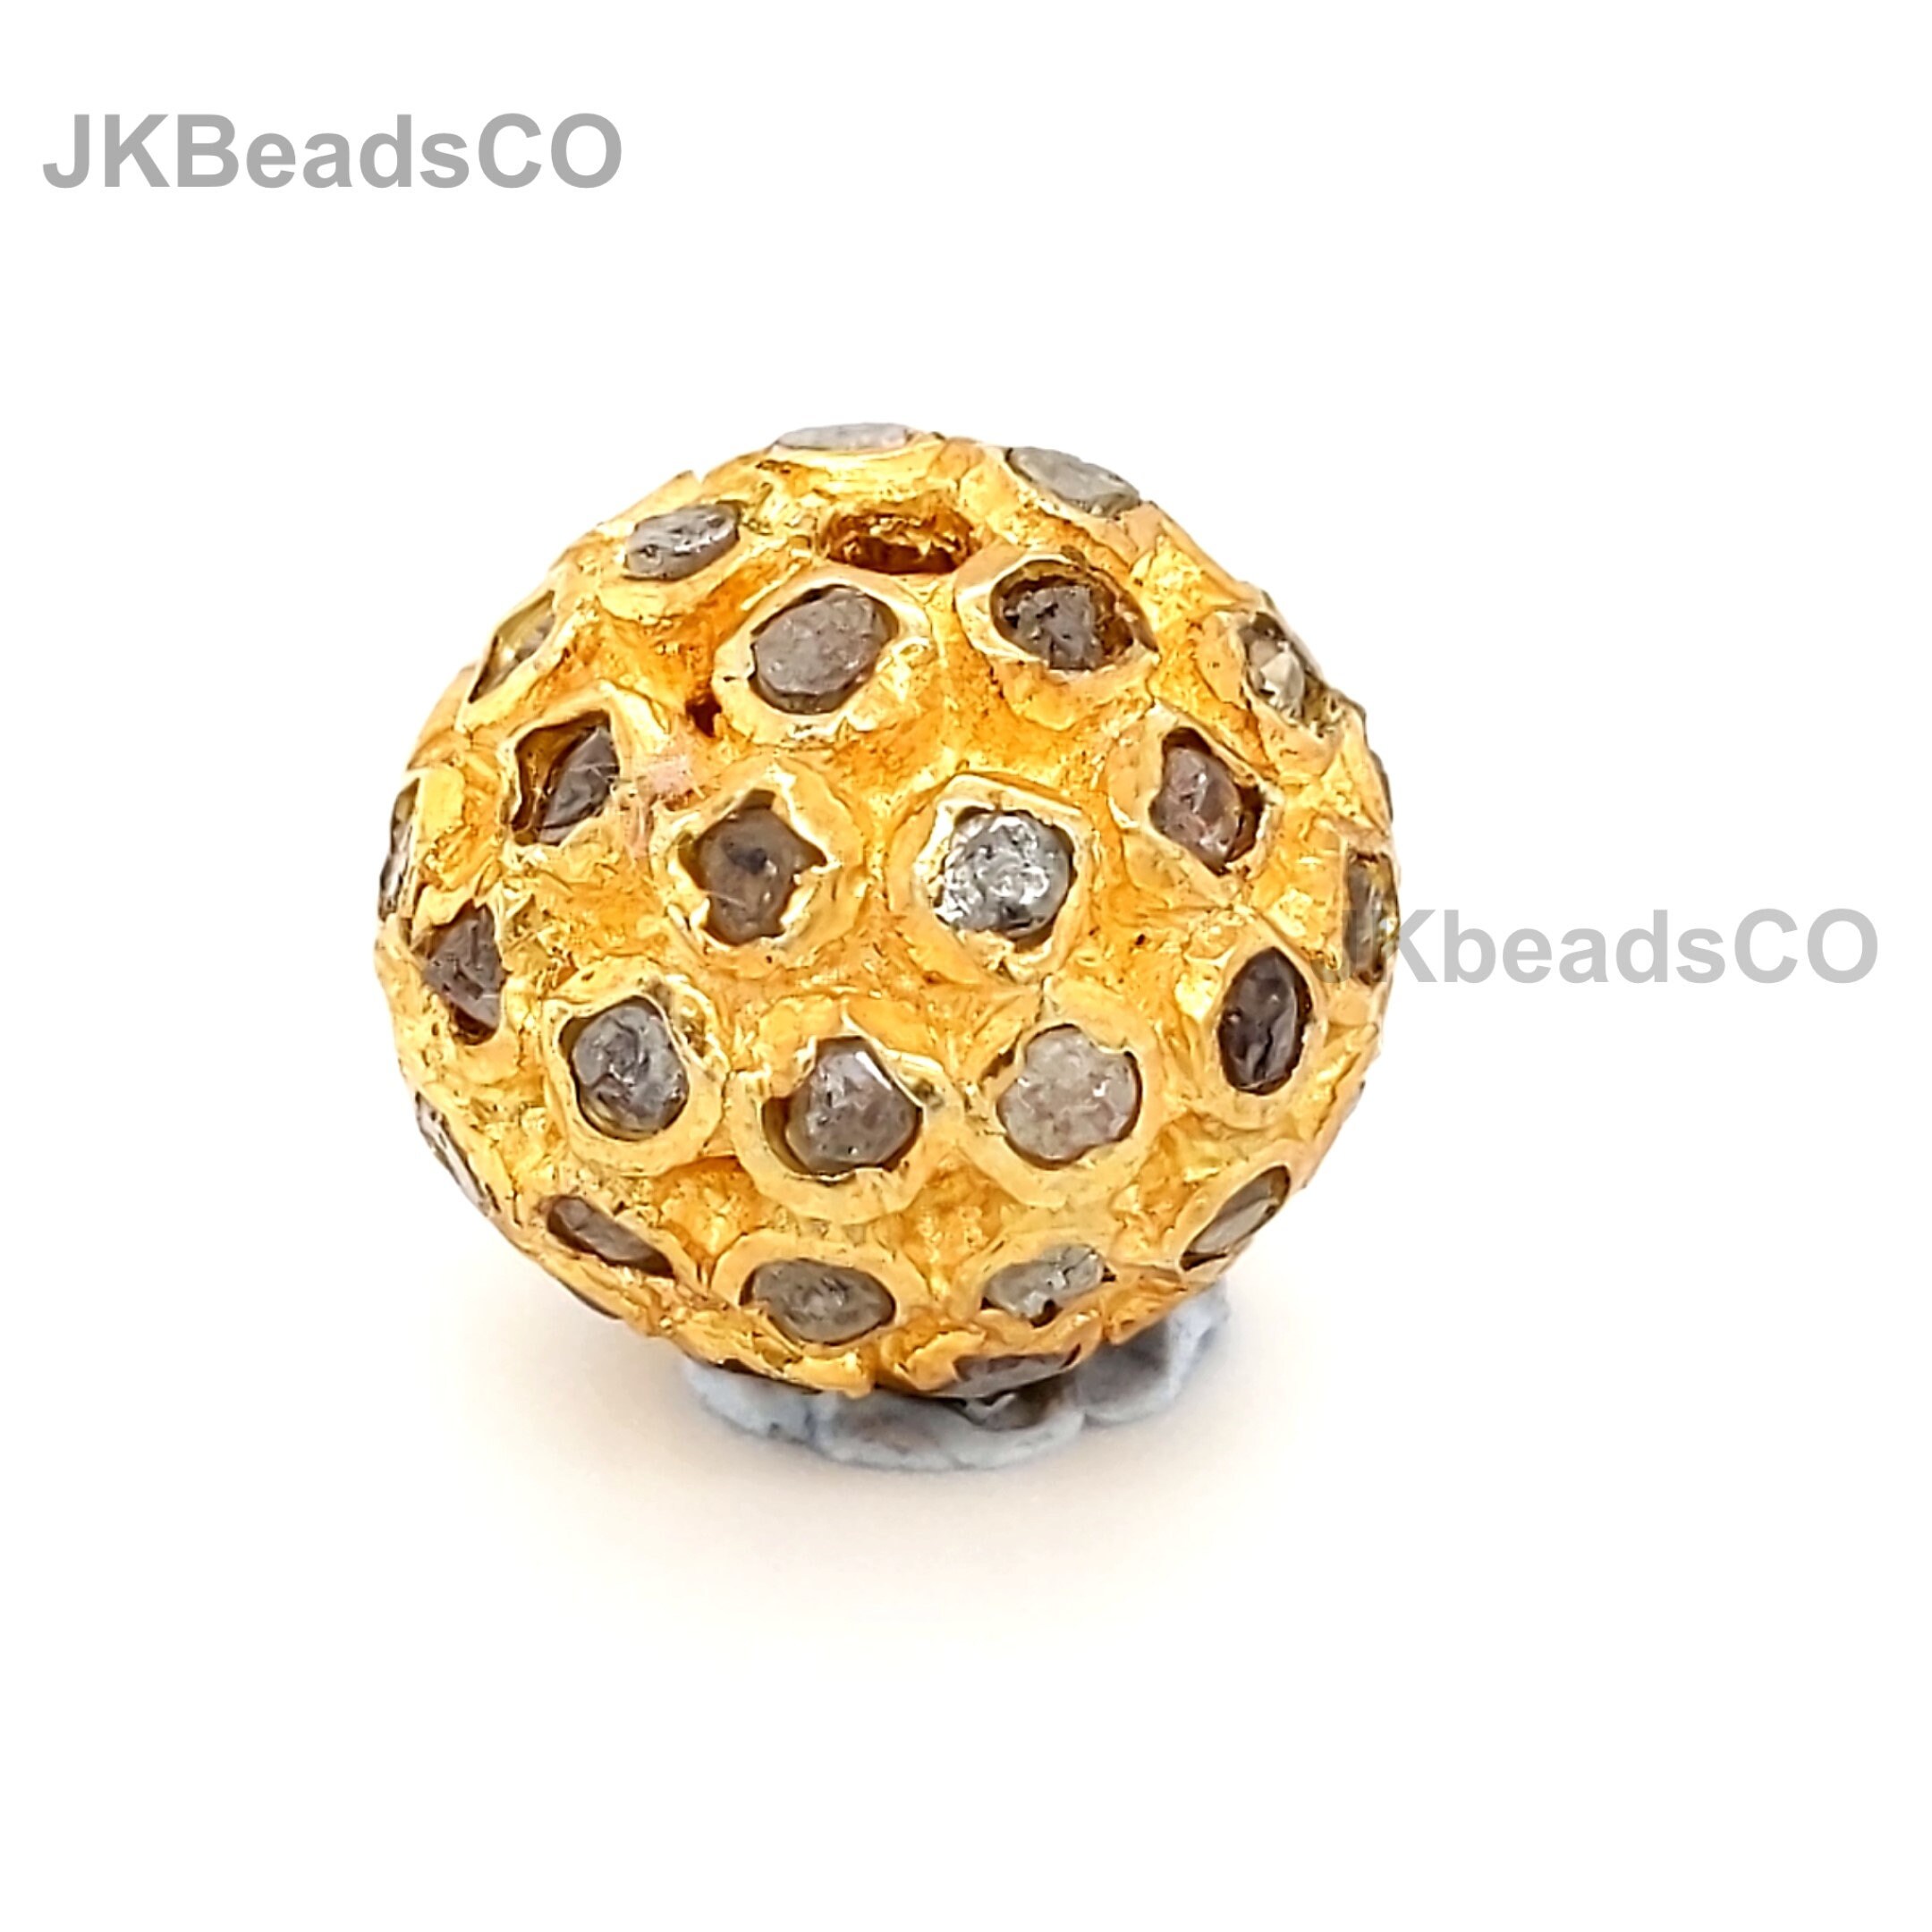 Gold Vermeil Diamond Beads Silver 925 Sterling Findings Jewelry Making Supplies 